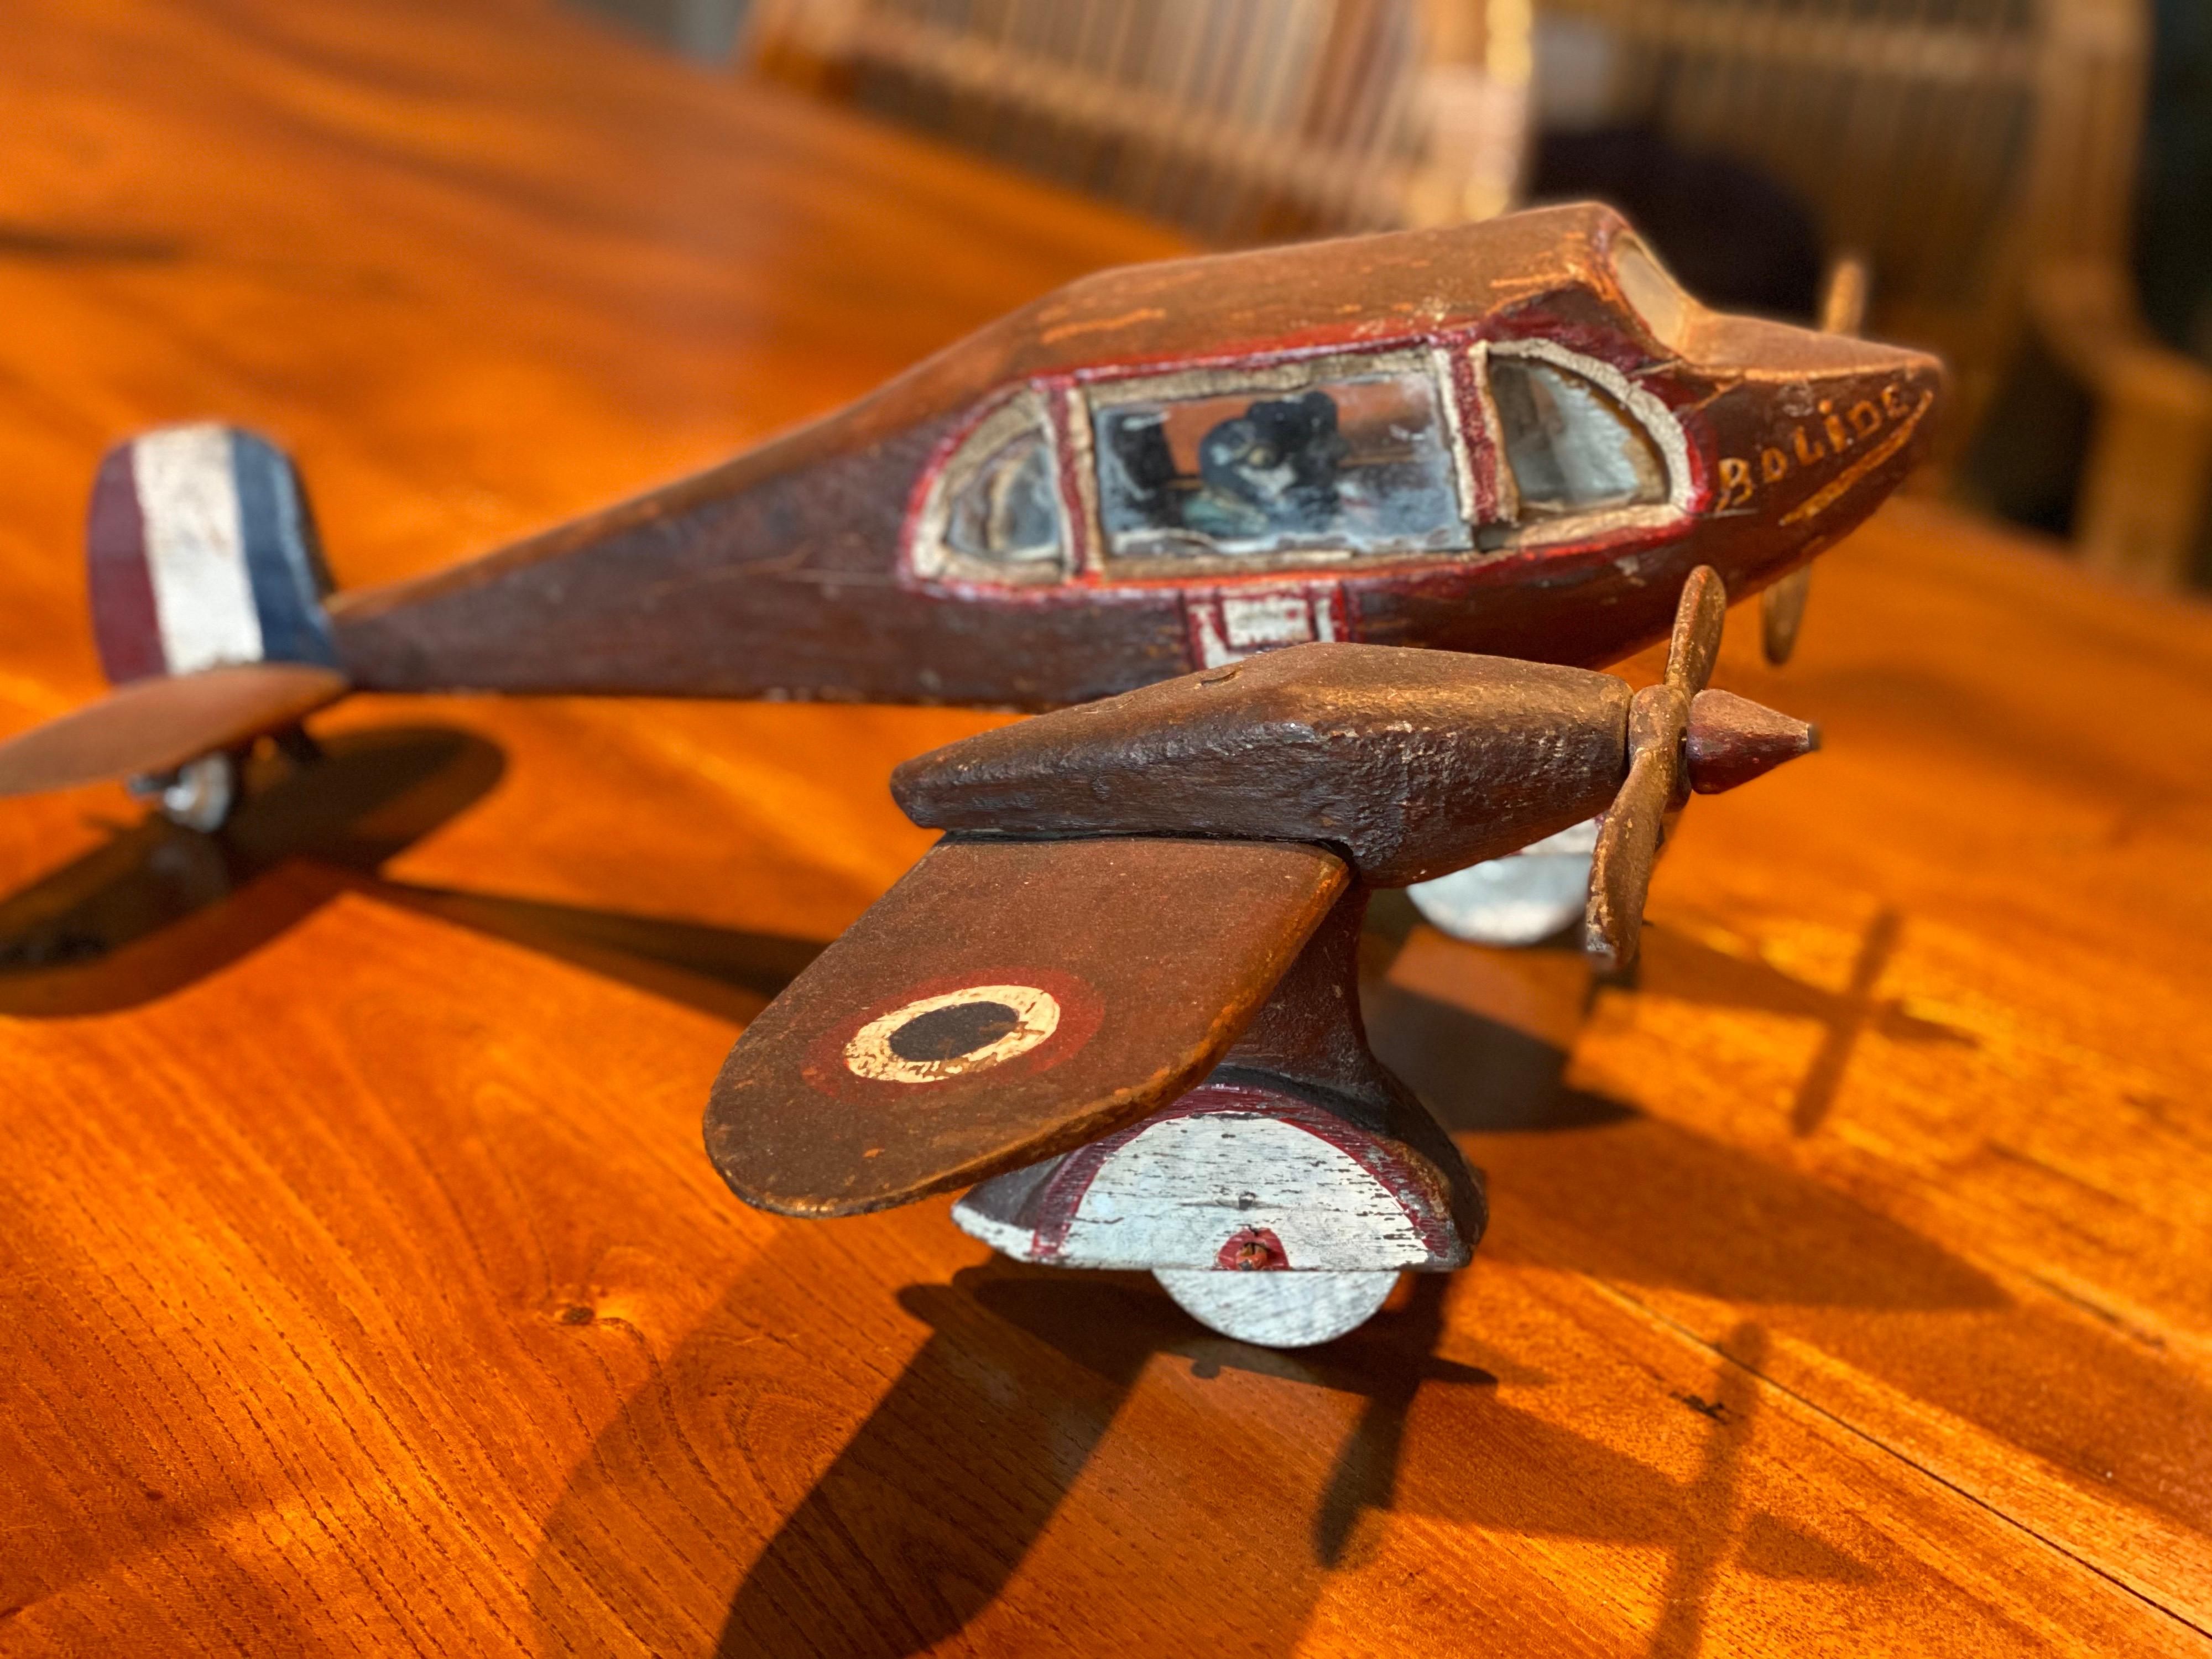 Carved and painted wood model of a French propeller plane, circa 1945
Painted in burgundy color with French flag colors on the tail. 
This handcrafted wooden french propeller plane is a great collectible piece as its attention to detail and